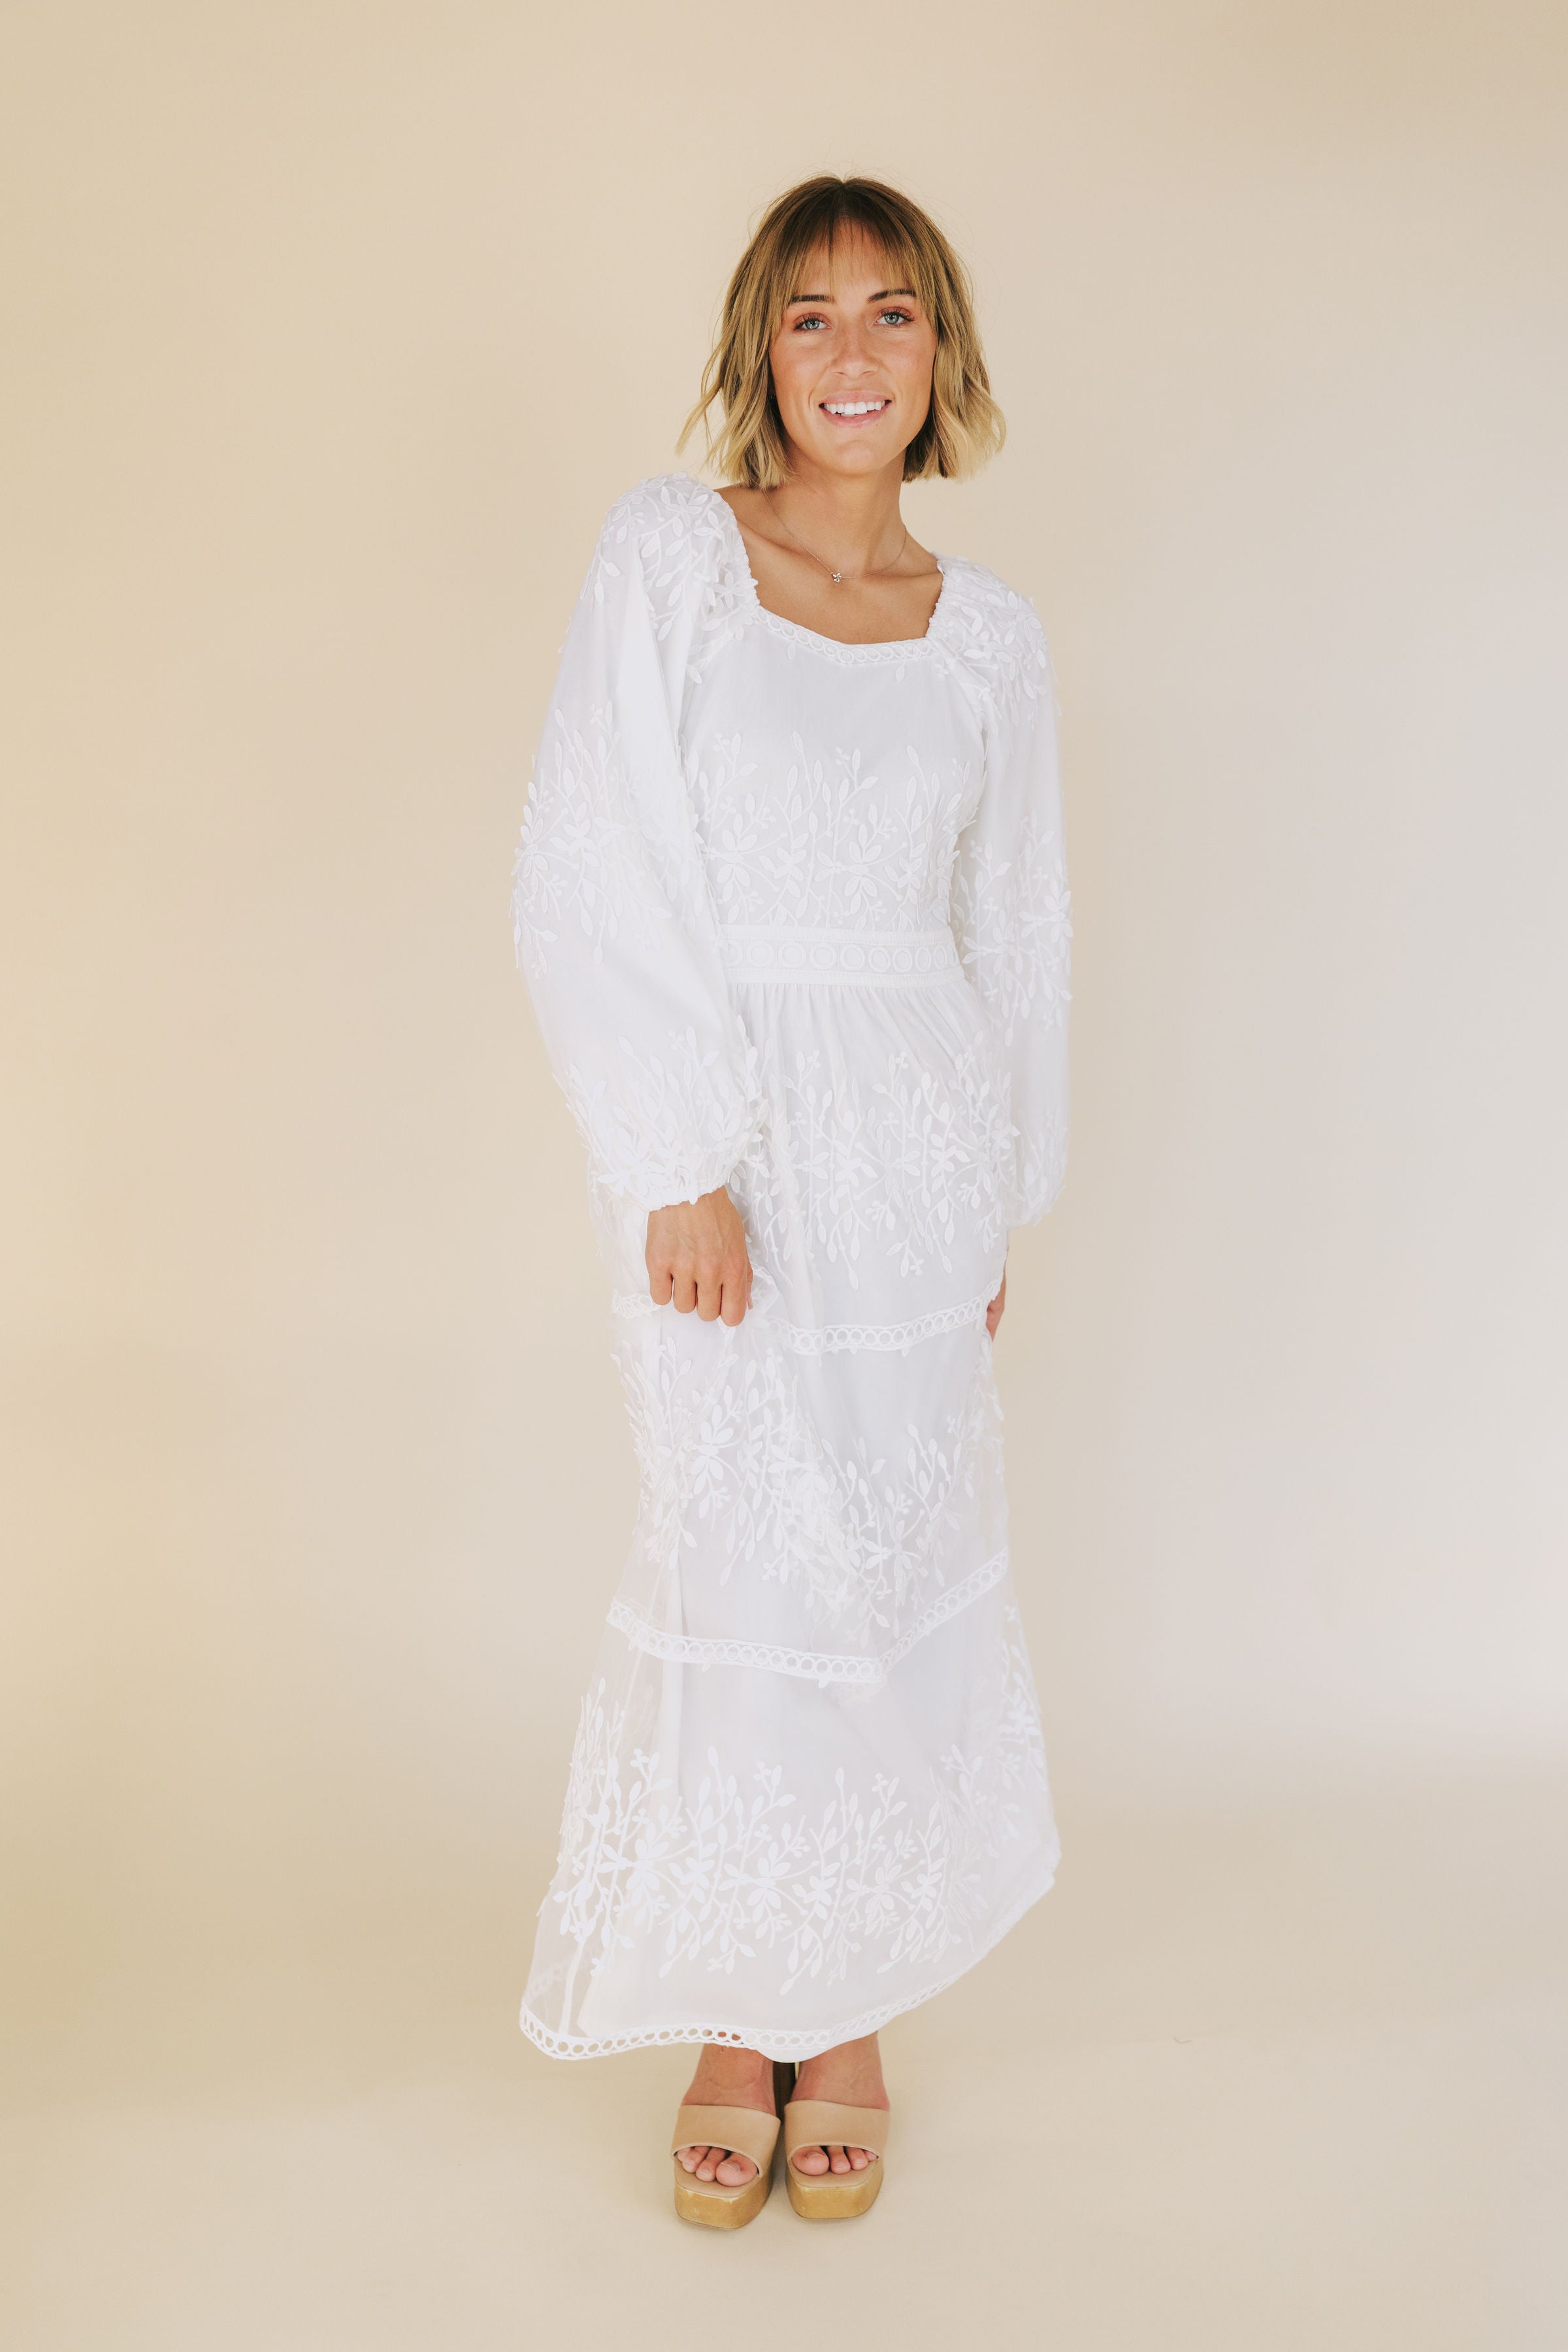 EXCLUSIVE - The White: Evelyn